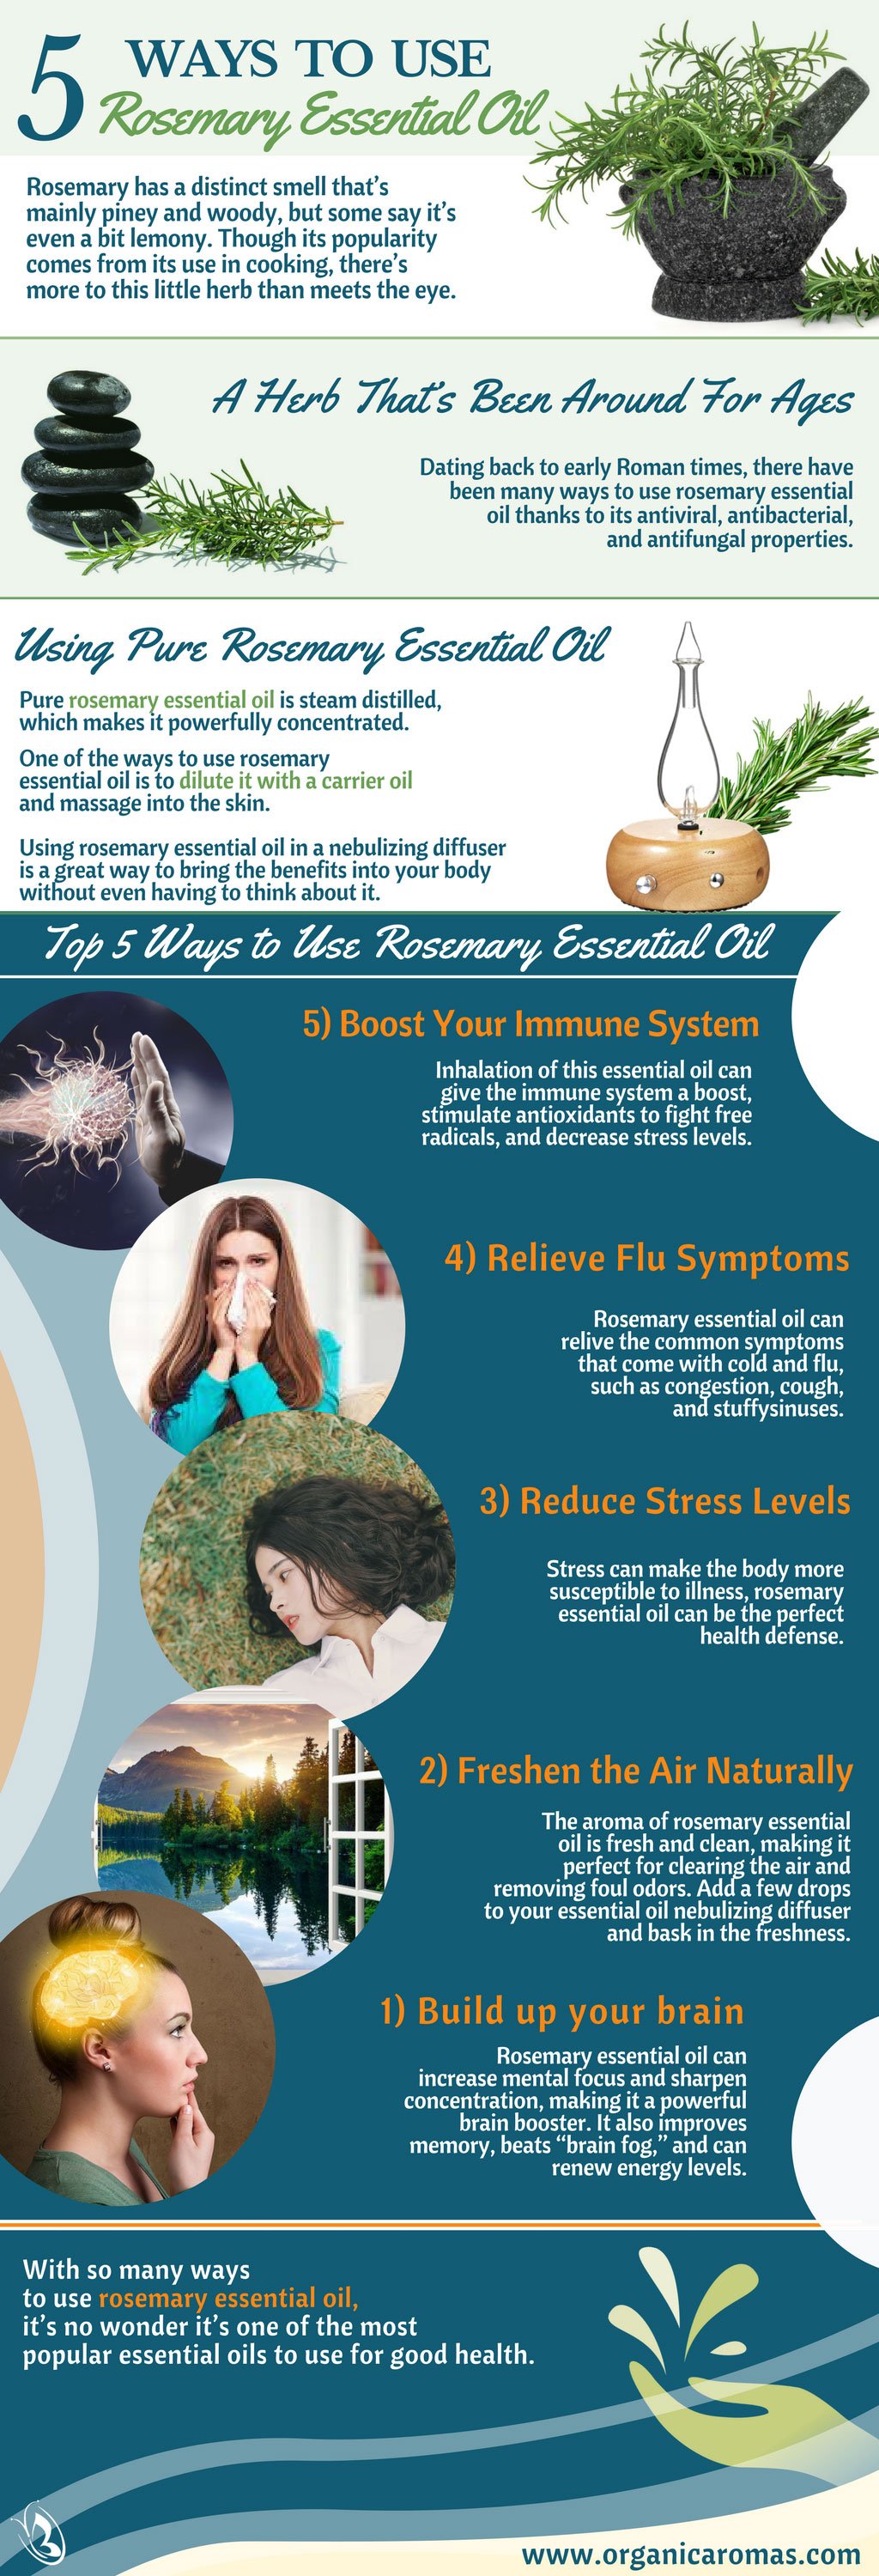 Top 5 Ways to Use Rosemary Essential Oil 